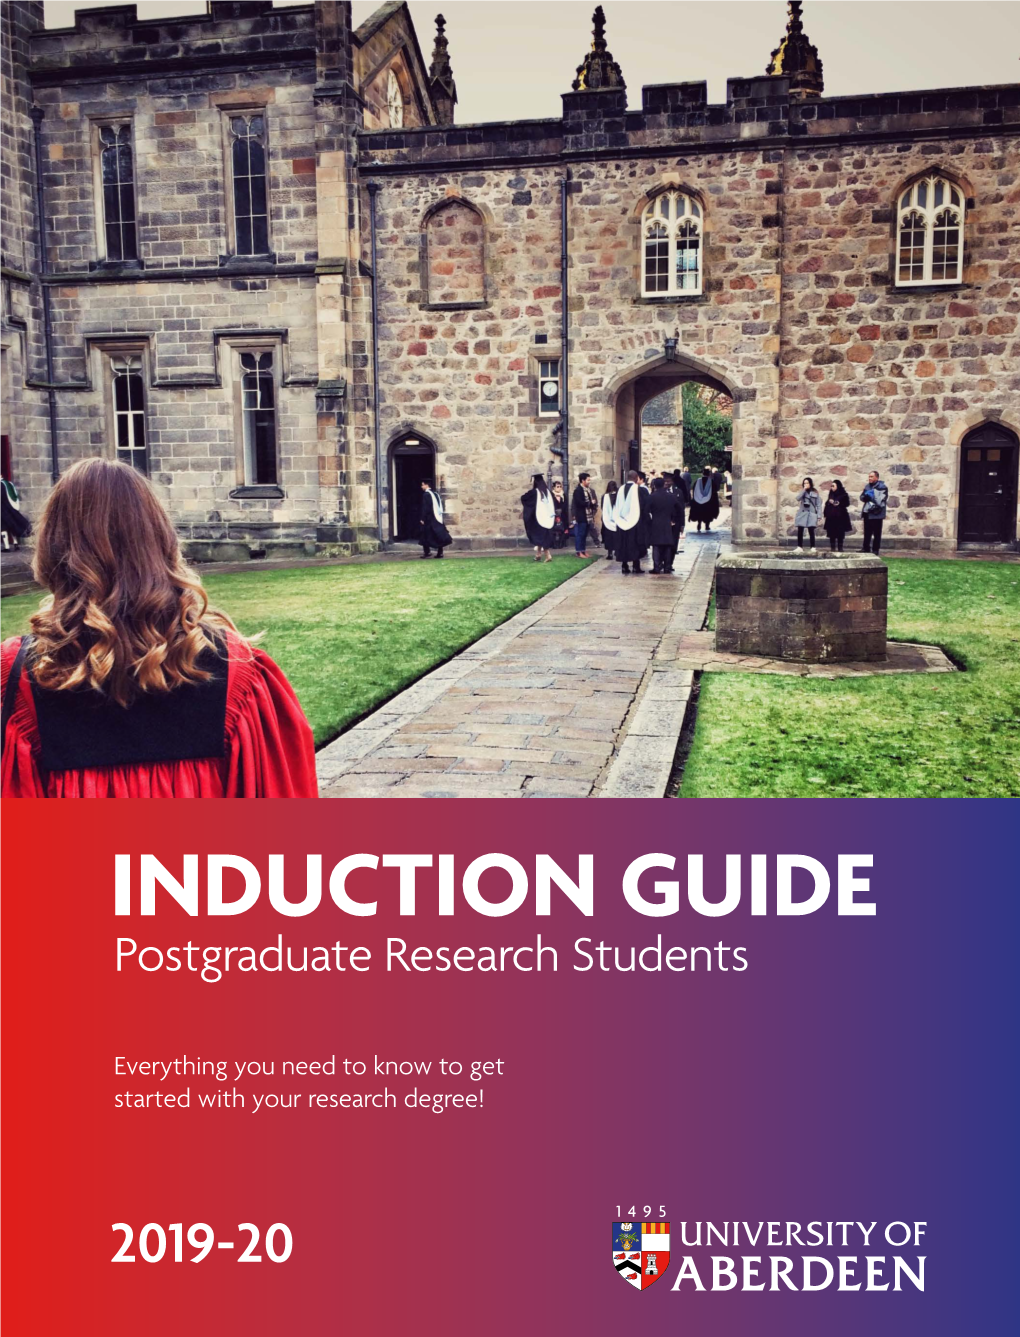 INDUCTION GUIDE Postgraduate Research Students